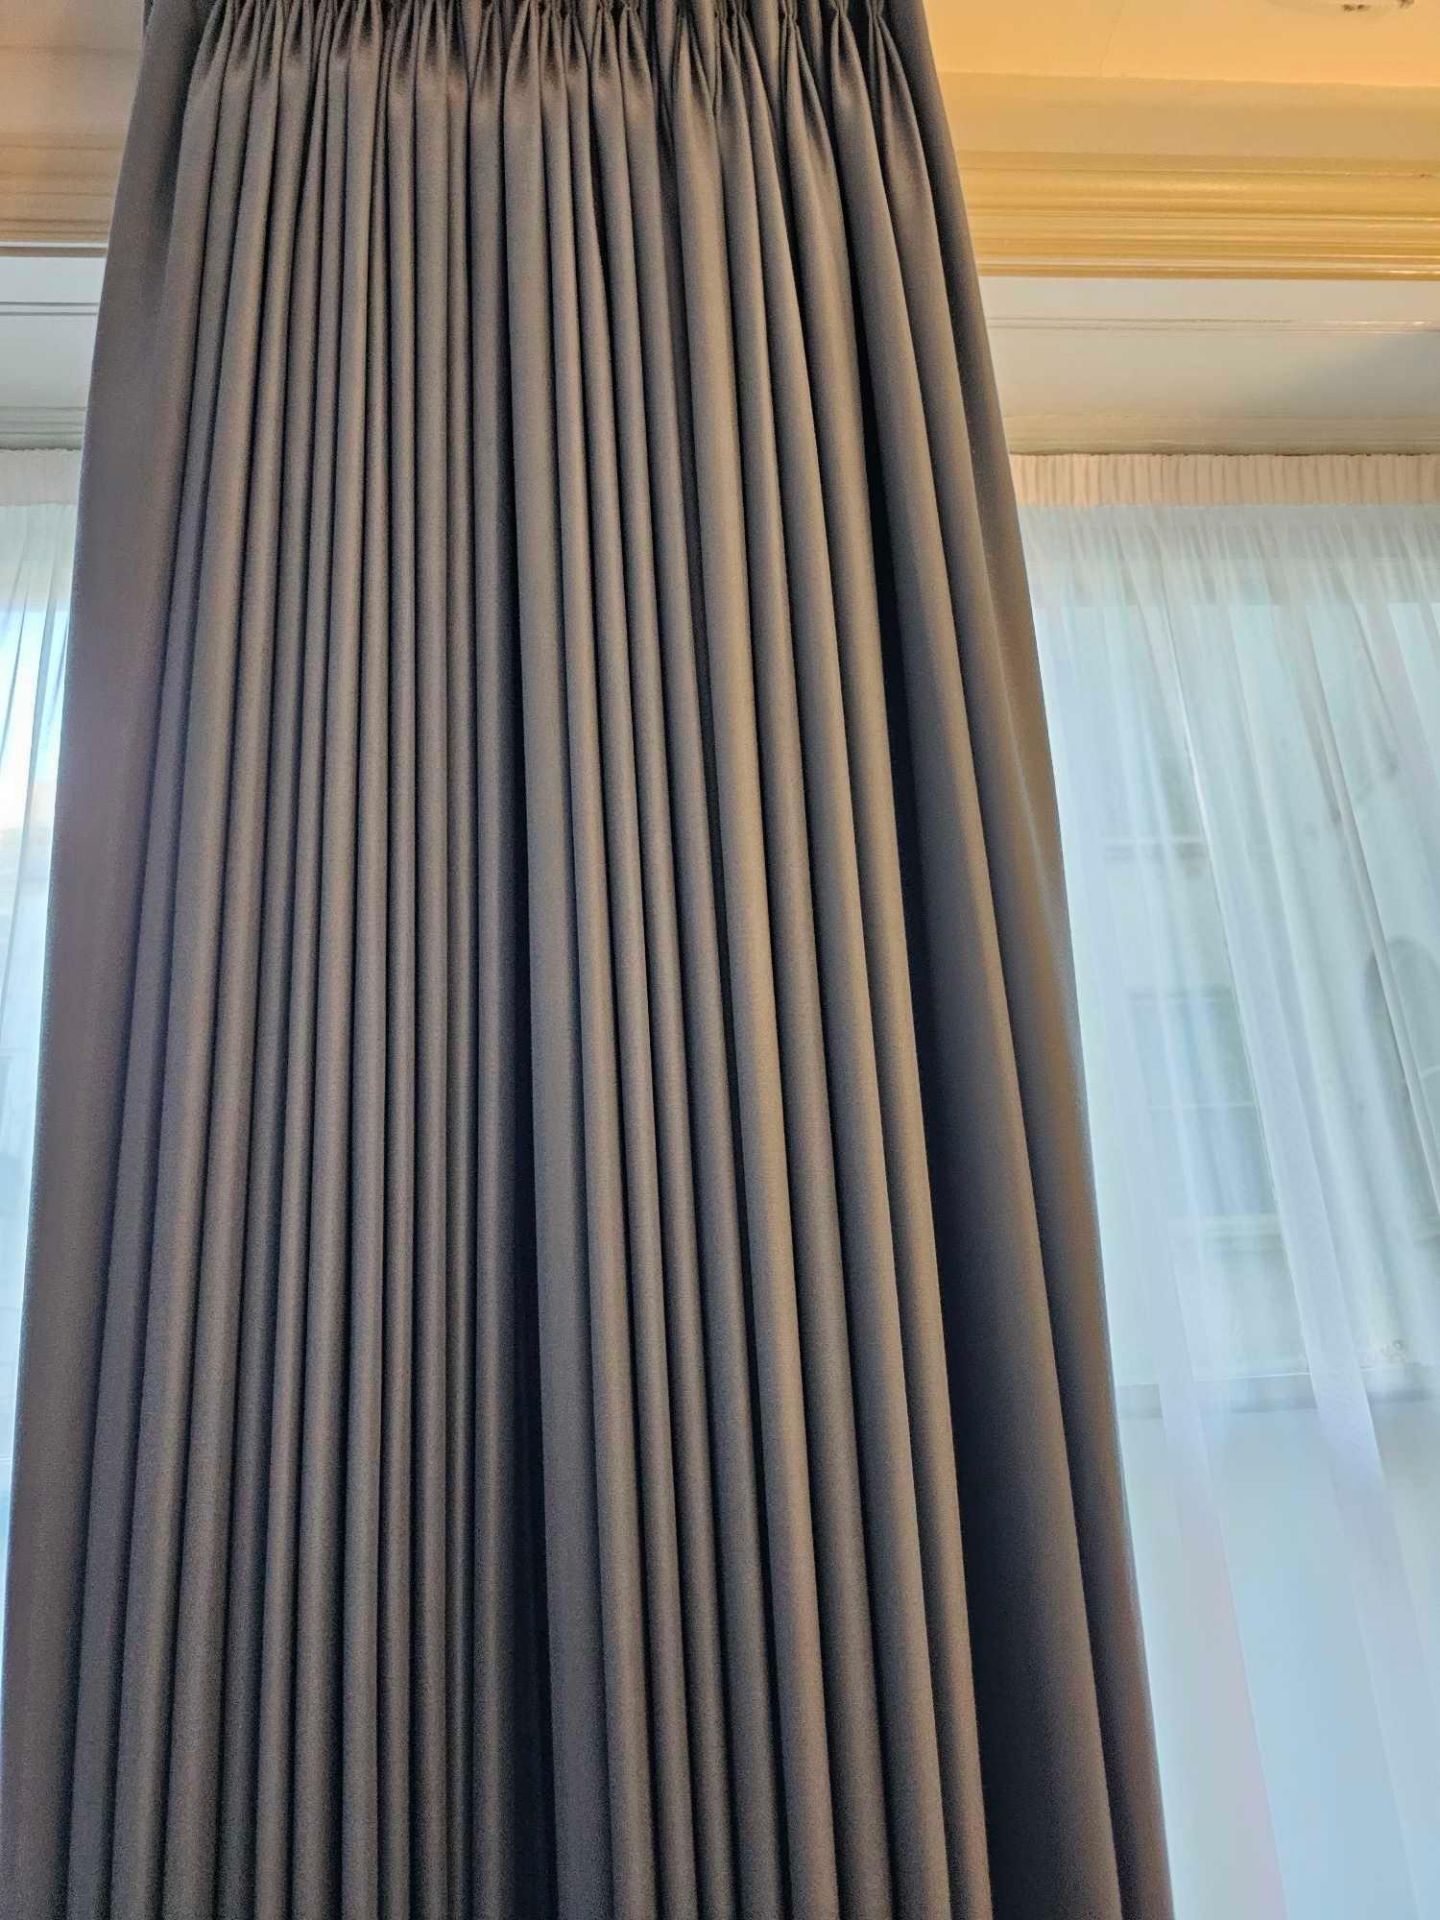 Drapes Blue Wove Linen Fully Lined With Pencil Pleat Top 240 x 340cm (Loc: Room 133) - Image 2 of 3